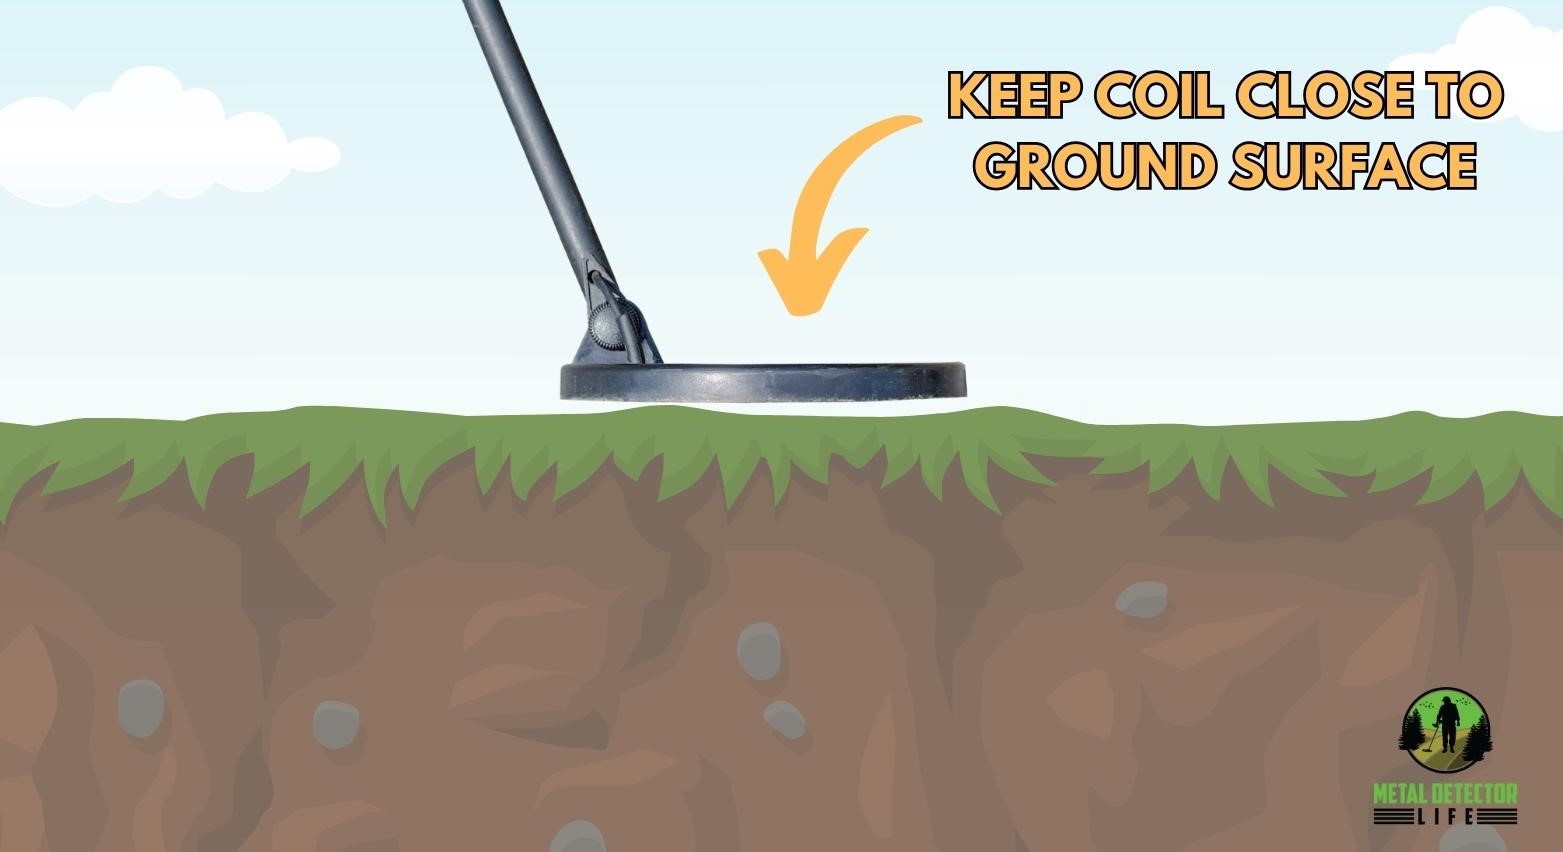 Keep the coil close to the ground surface. 